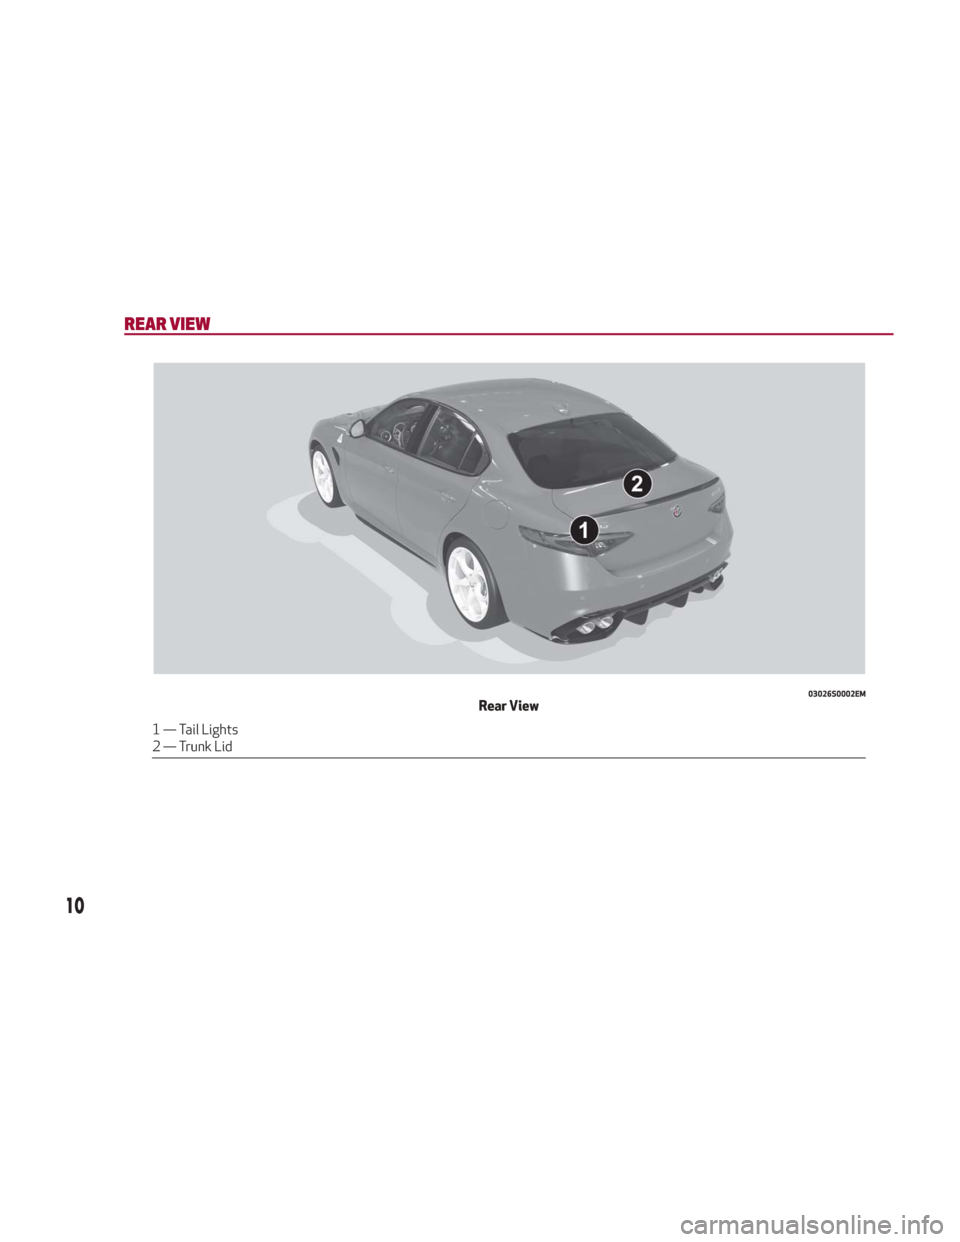 Alfa Romeo Giulia 2018 User Guide REAR VIEW
03026S0002EMRear View
1 — Tail Lights
2 — Trunk Lid
10 